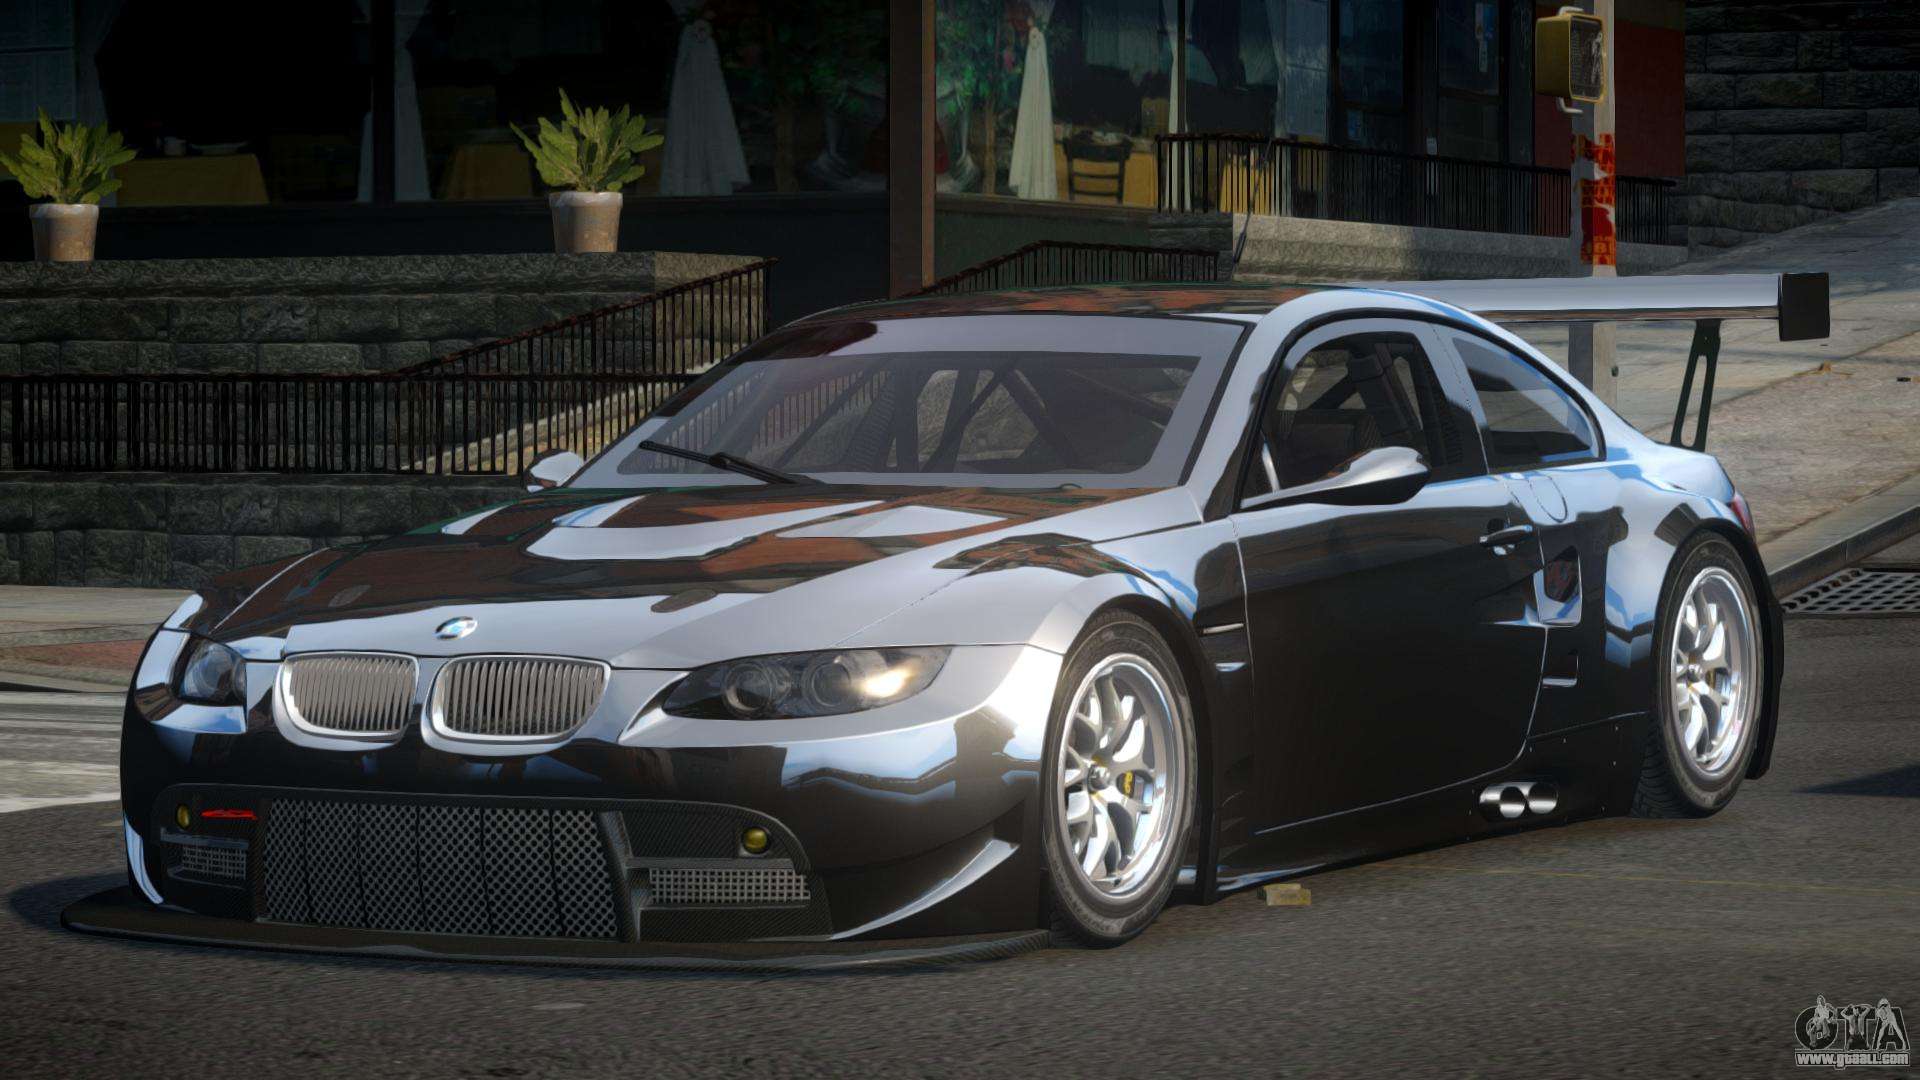 BMW M3 E92 GS Tuning for GTA 4